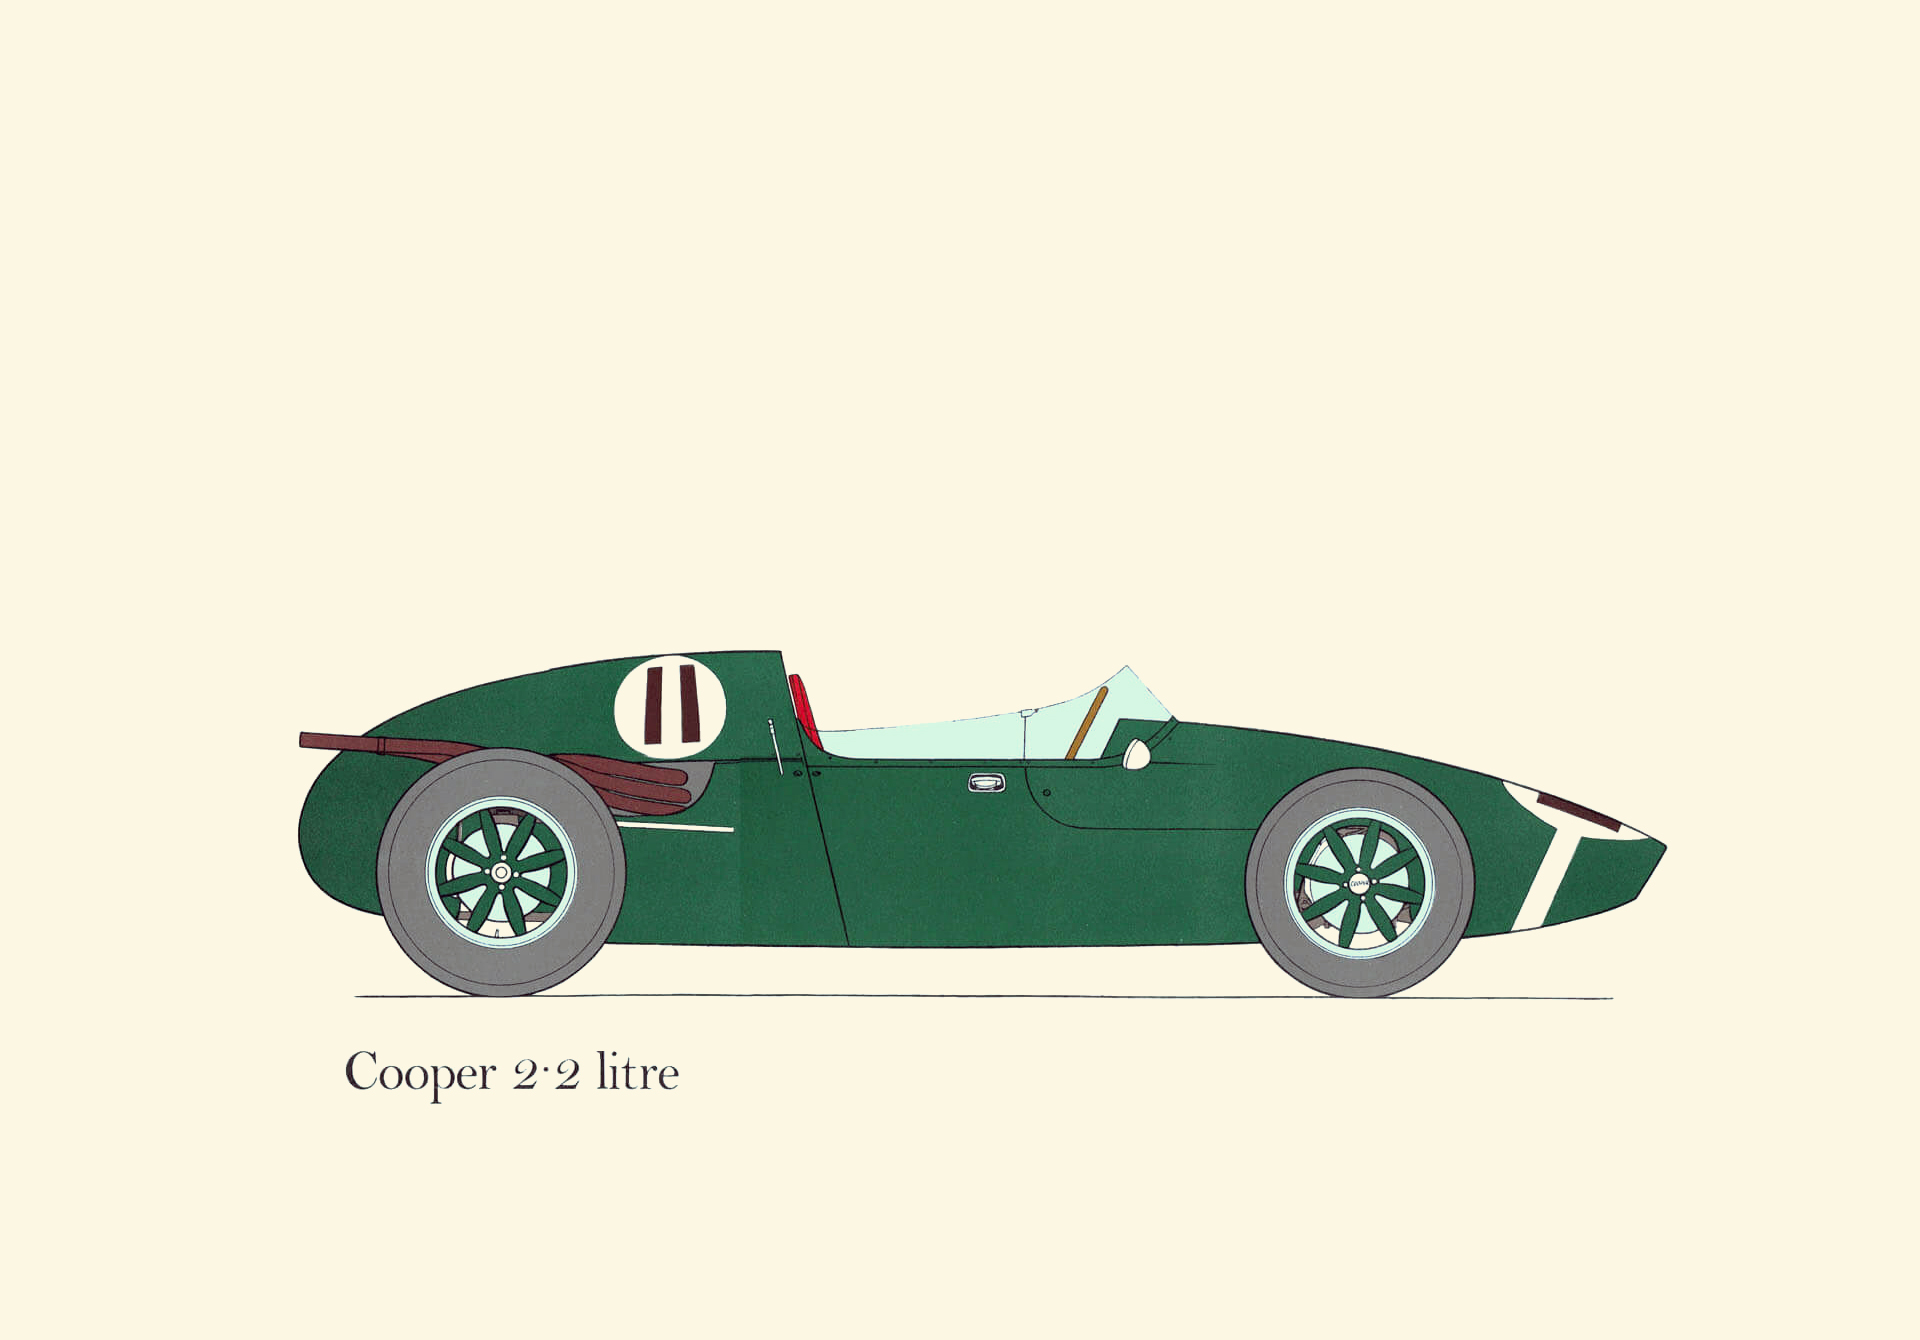 1958/60 Cooper 2.2 litre: Drawn by George Oliver